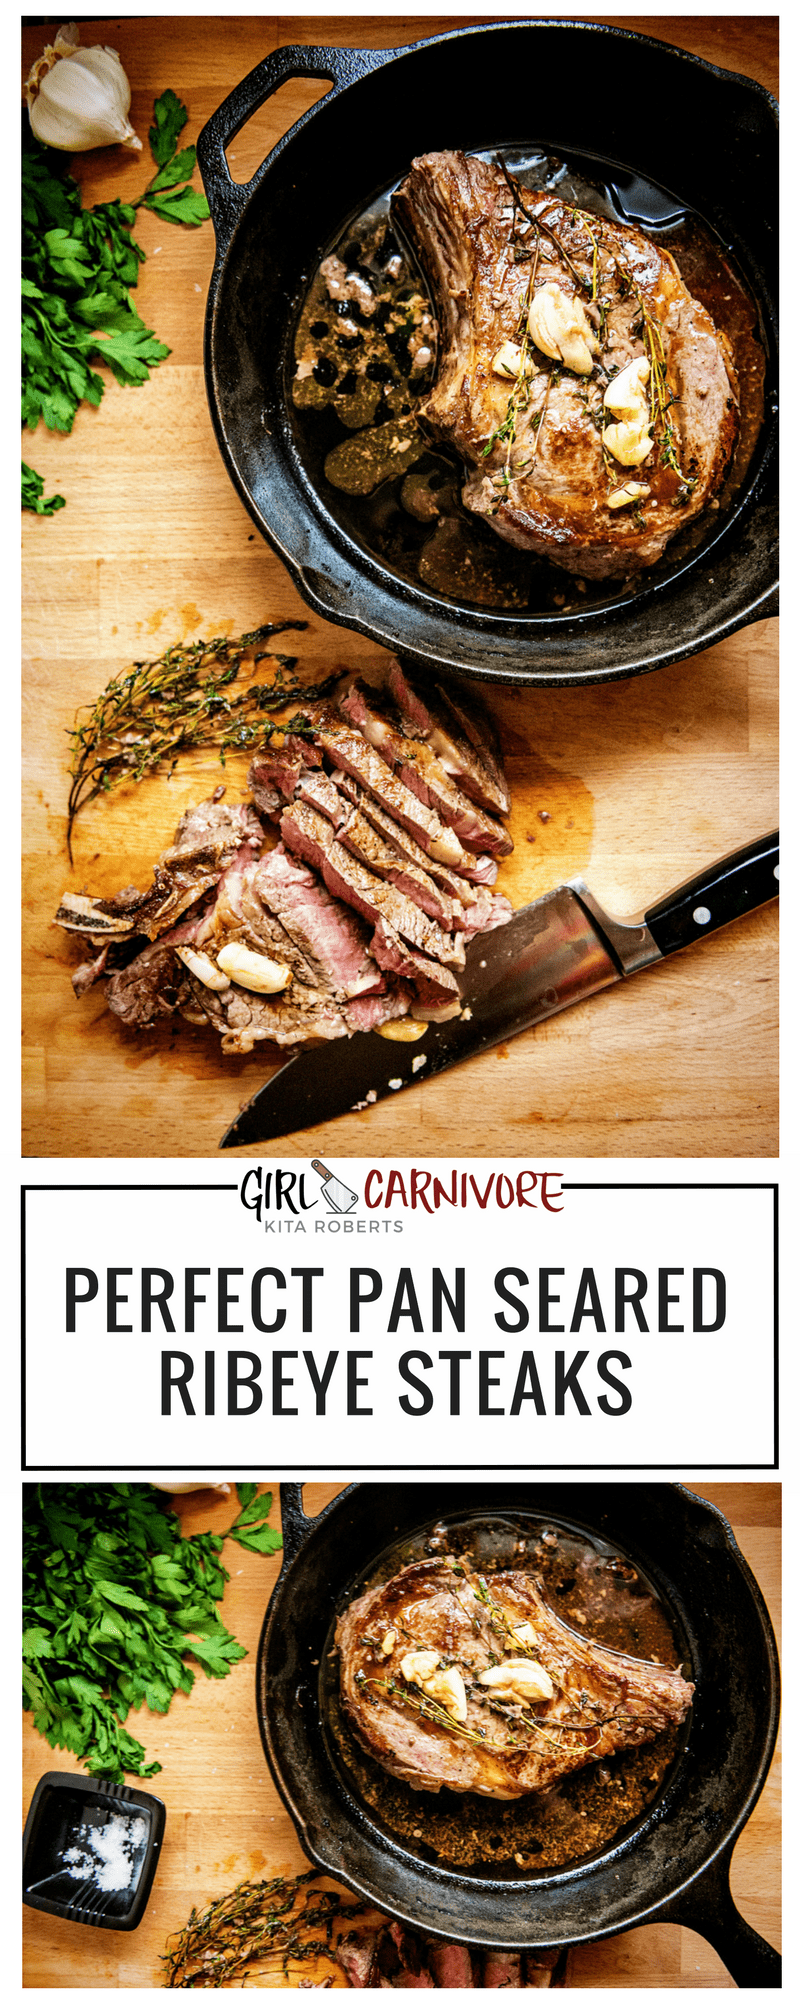 Looking for a classic restaurant quality steak? Check out this Perfect Pan Seared Ribeye Steak recipe over at GirCarnivore.com